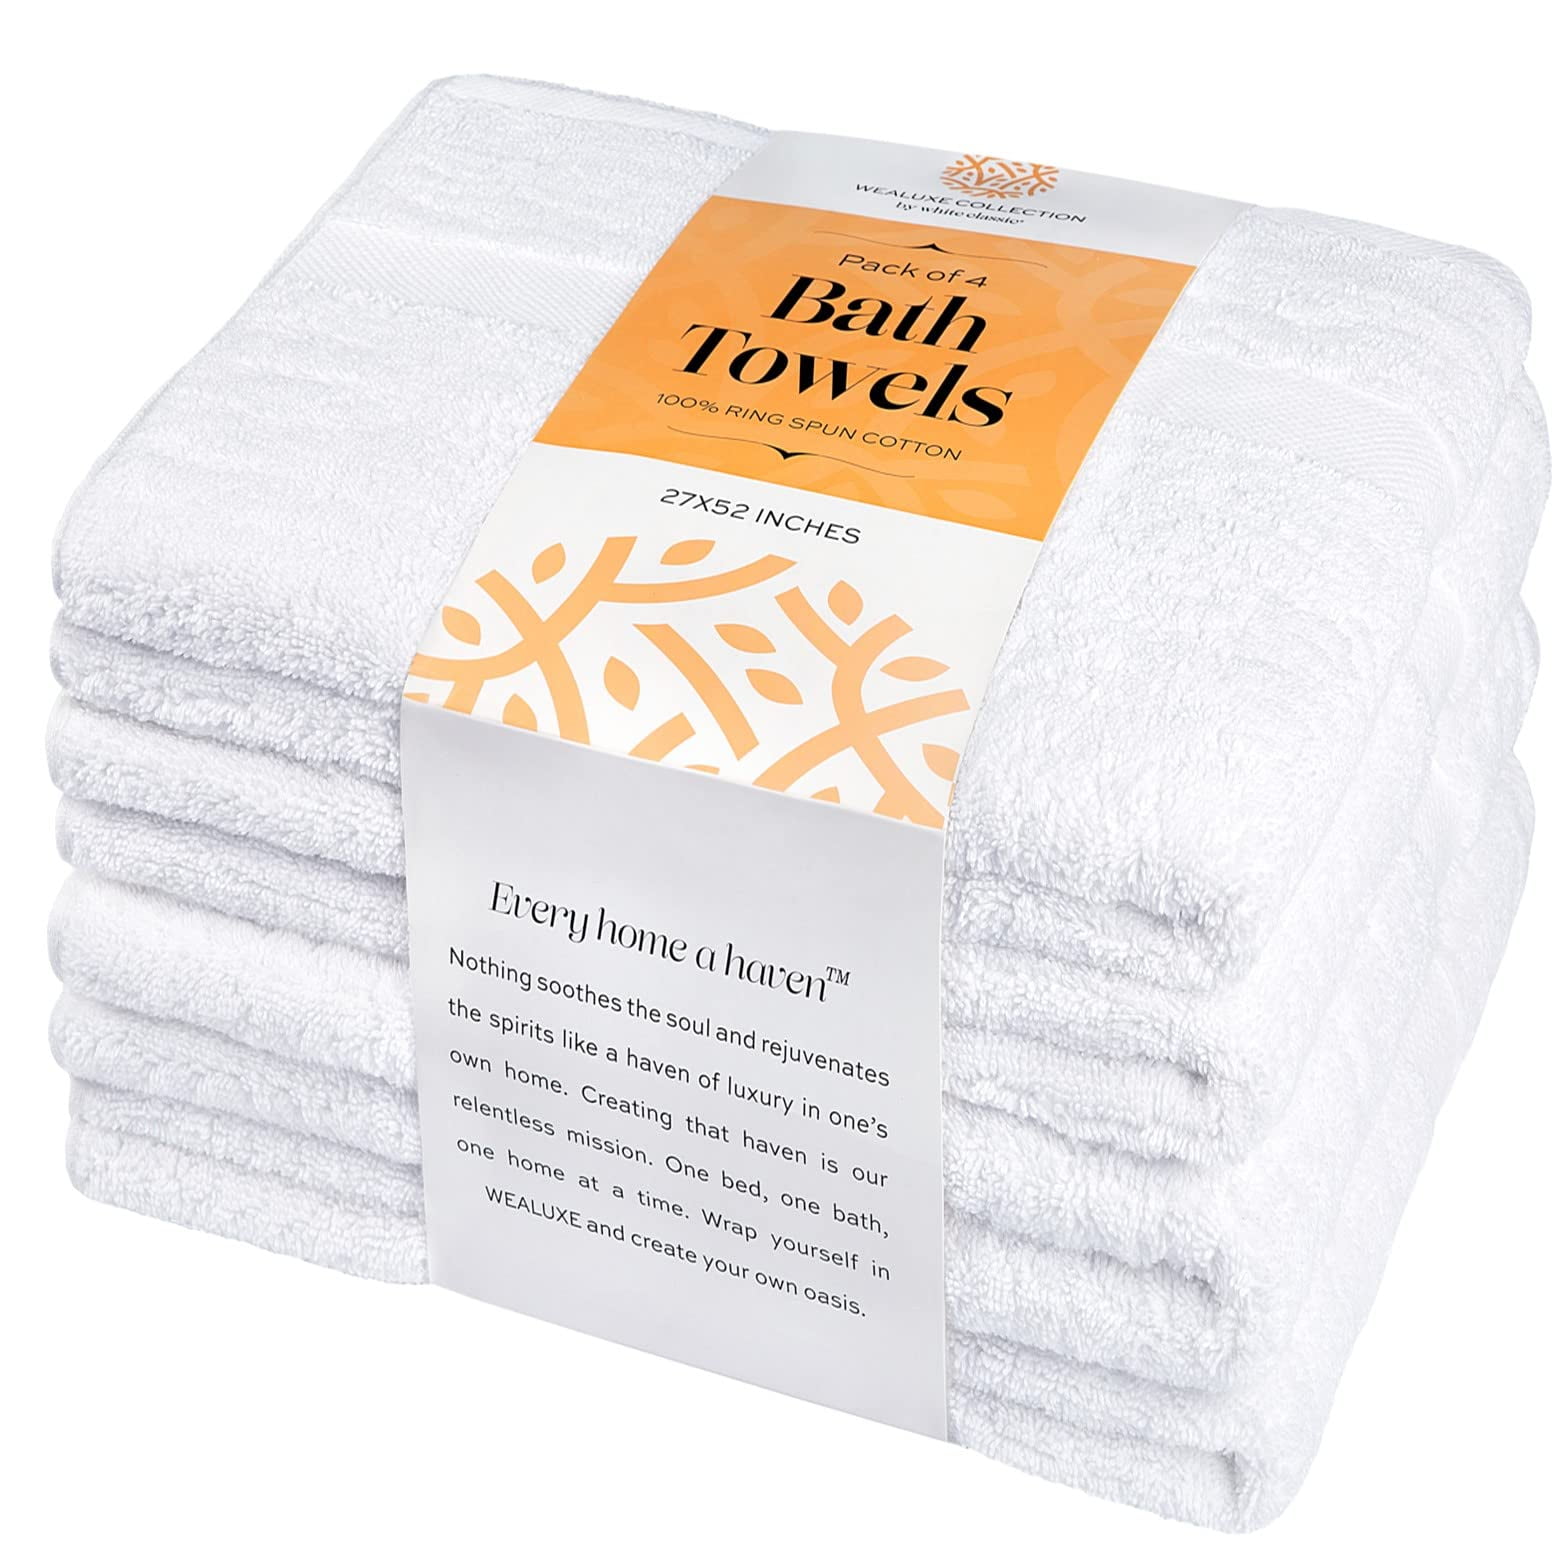  HAVLULAND Pack of 4 Premium Bath Towels Set, Extra Large 27 x  54 Inch, 100% Ring Spun Cotton Thick Super Absorbent Quick-Dry Towels,  Luxury Hotel & Spa Towels - Coral : Home & Kitchen